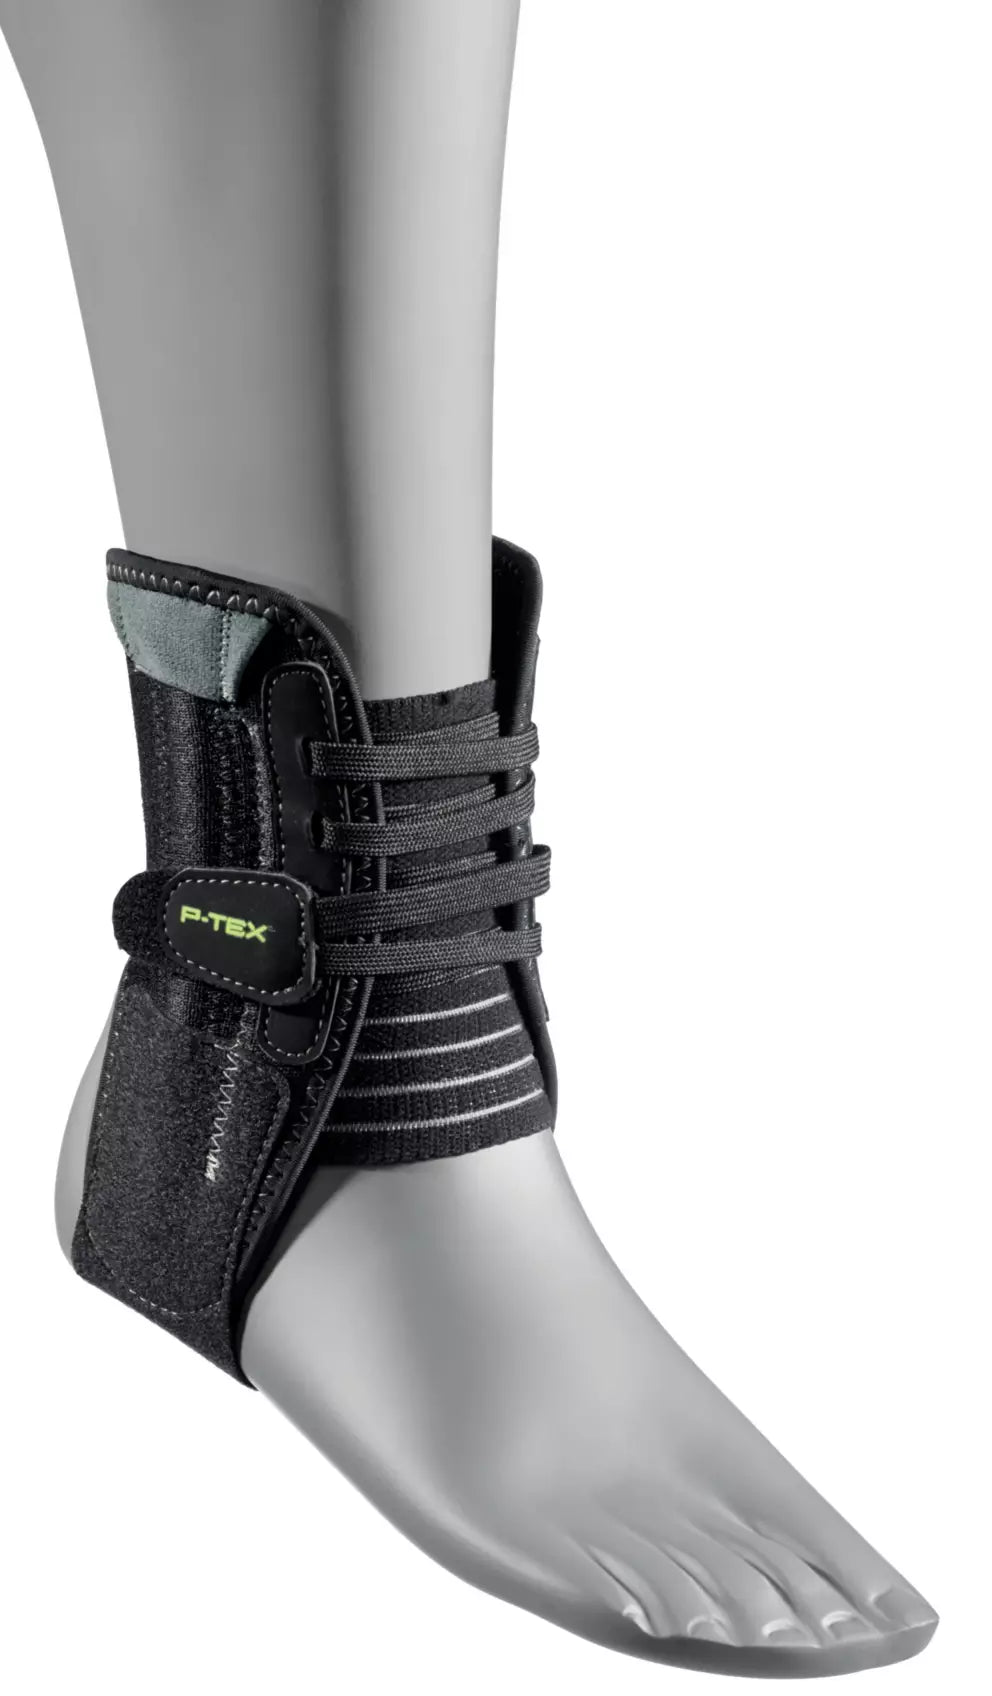 P-TEX Ankle Brace With Stabilizers